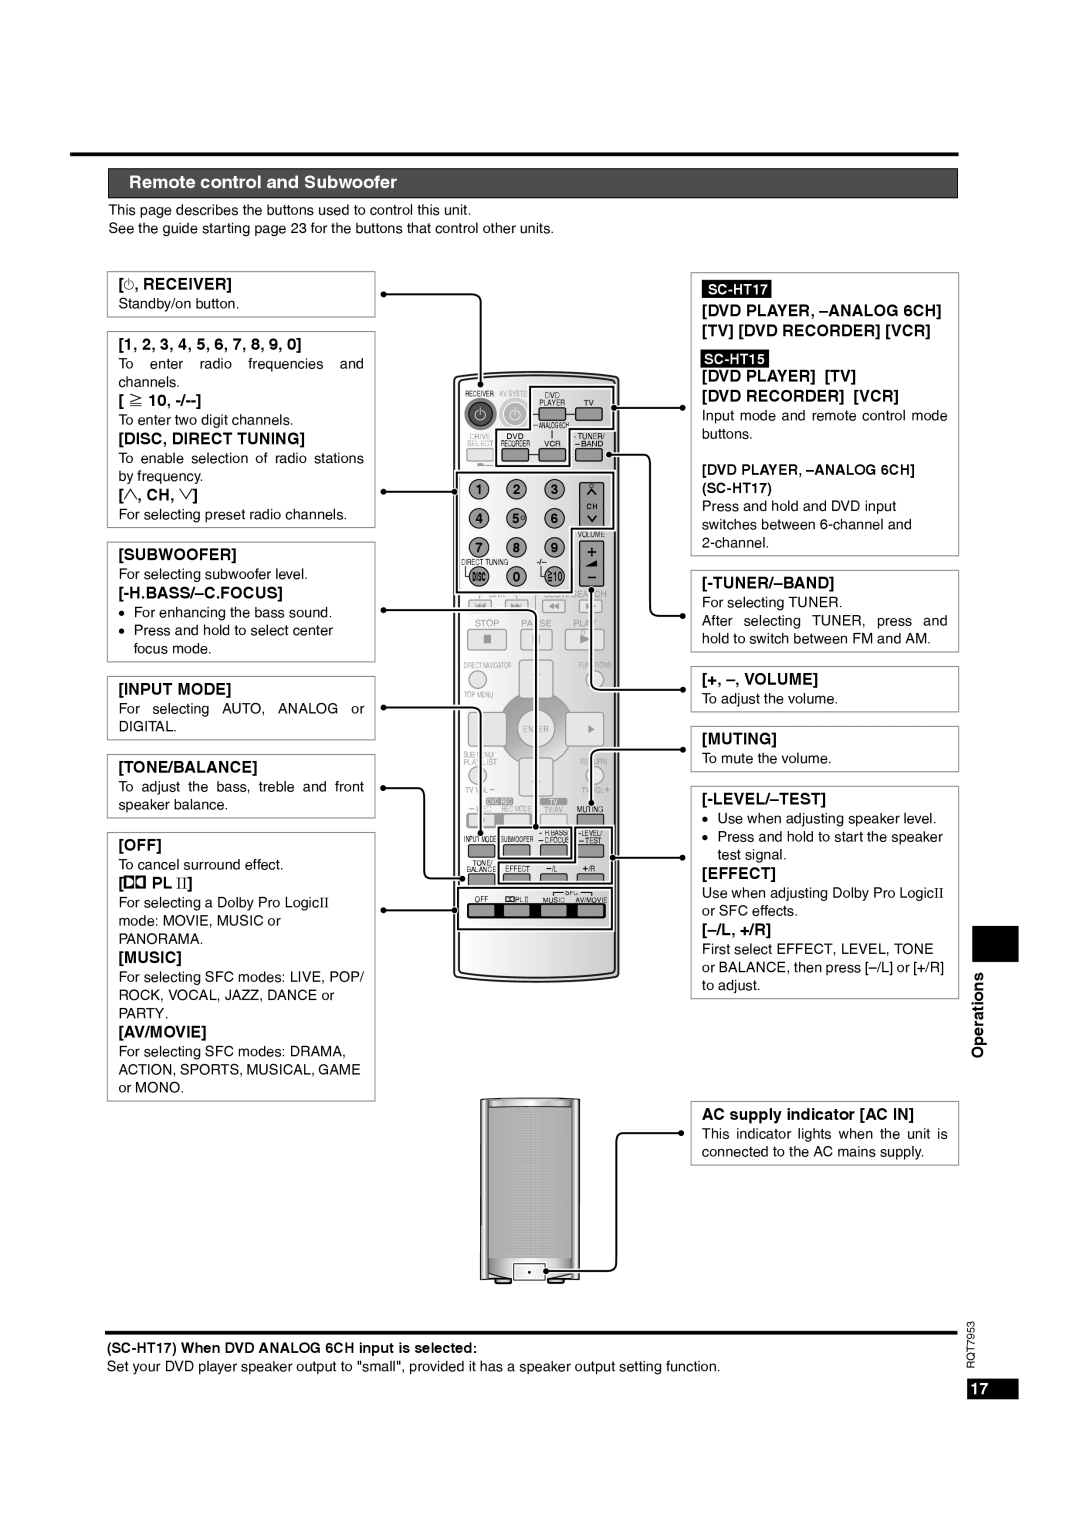 Panasonic SC-HT17 operating instructions Remote control and Subwoofer 